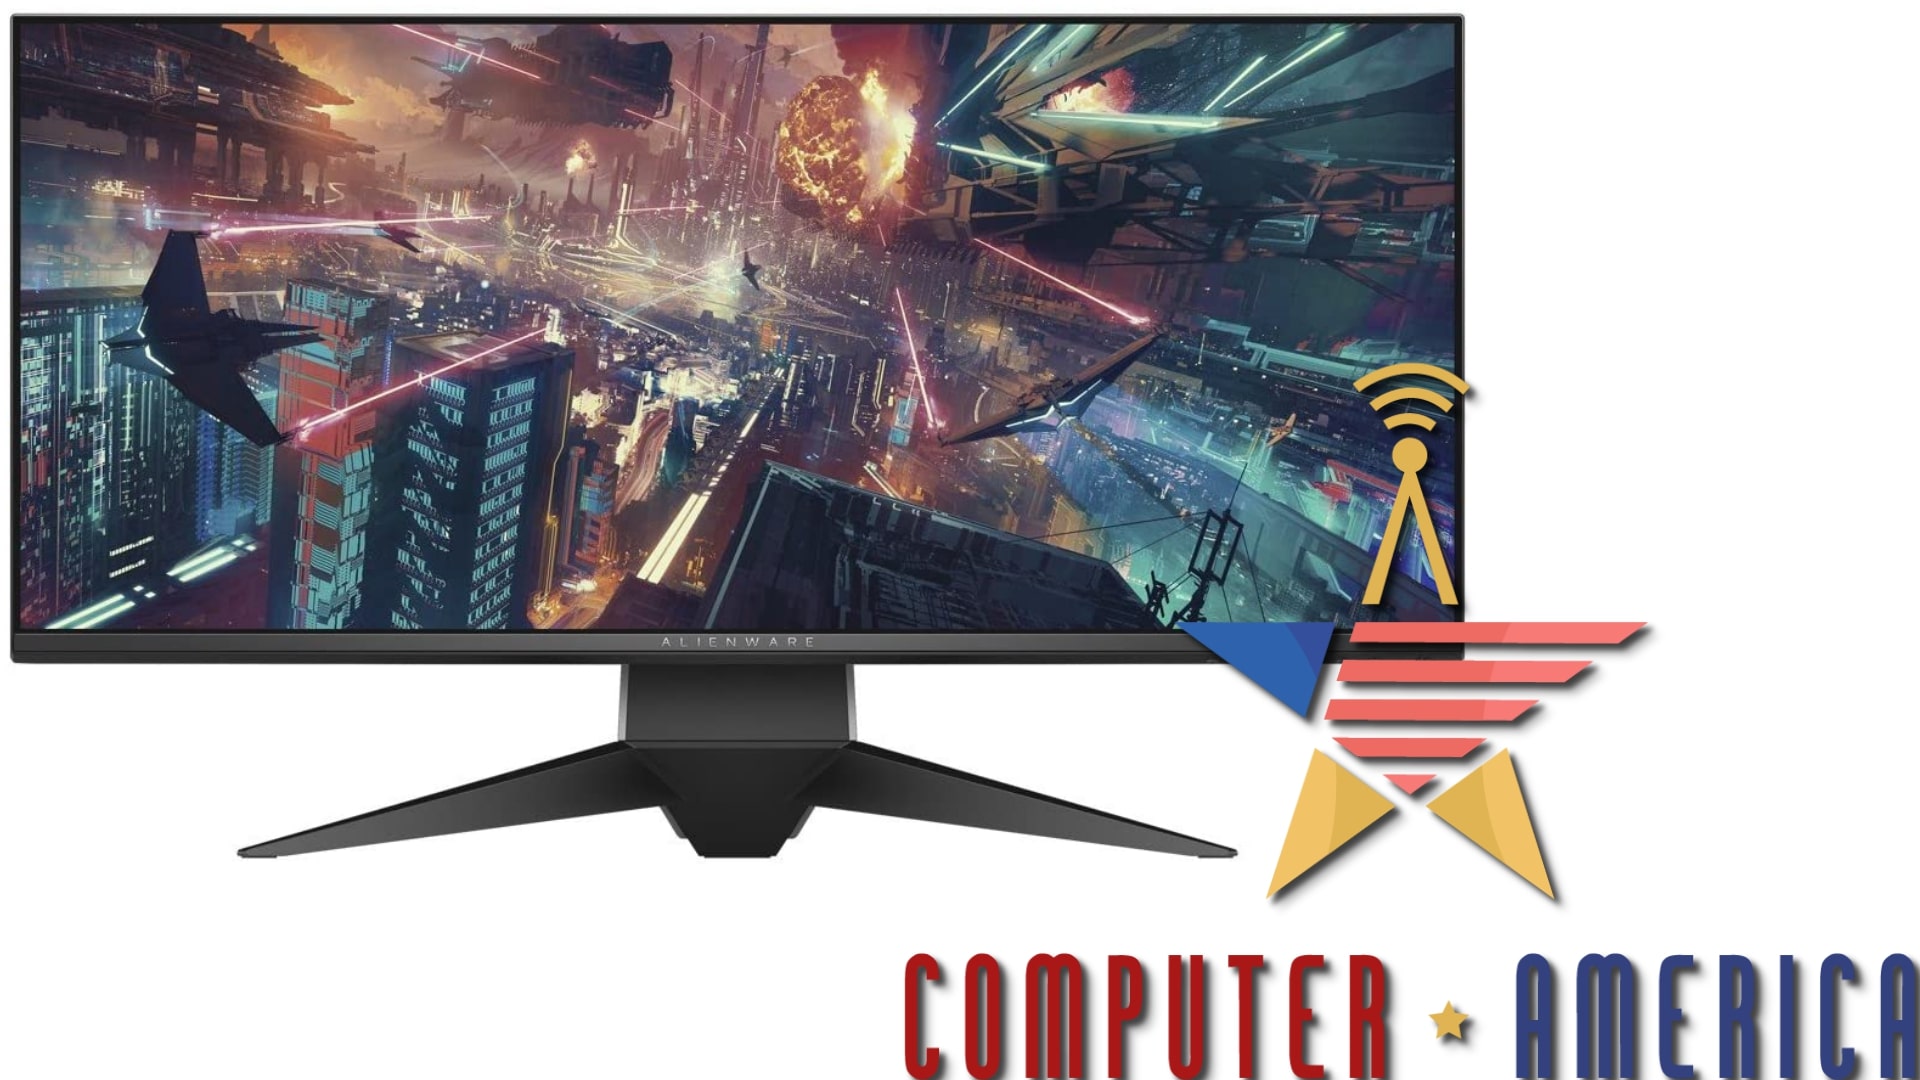 Alienware AW3418DW 1900R Review, Ultrawide Gaming Display